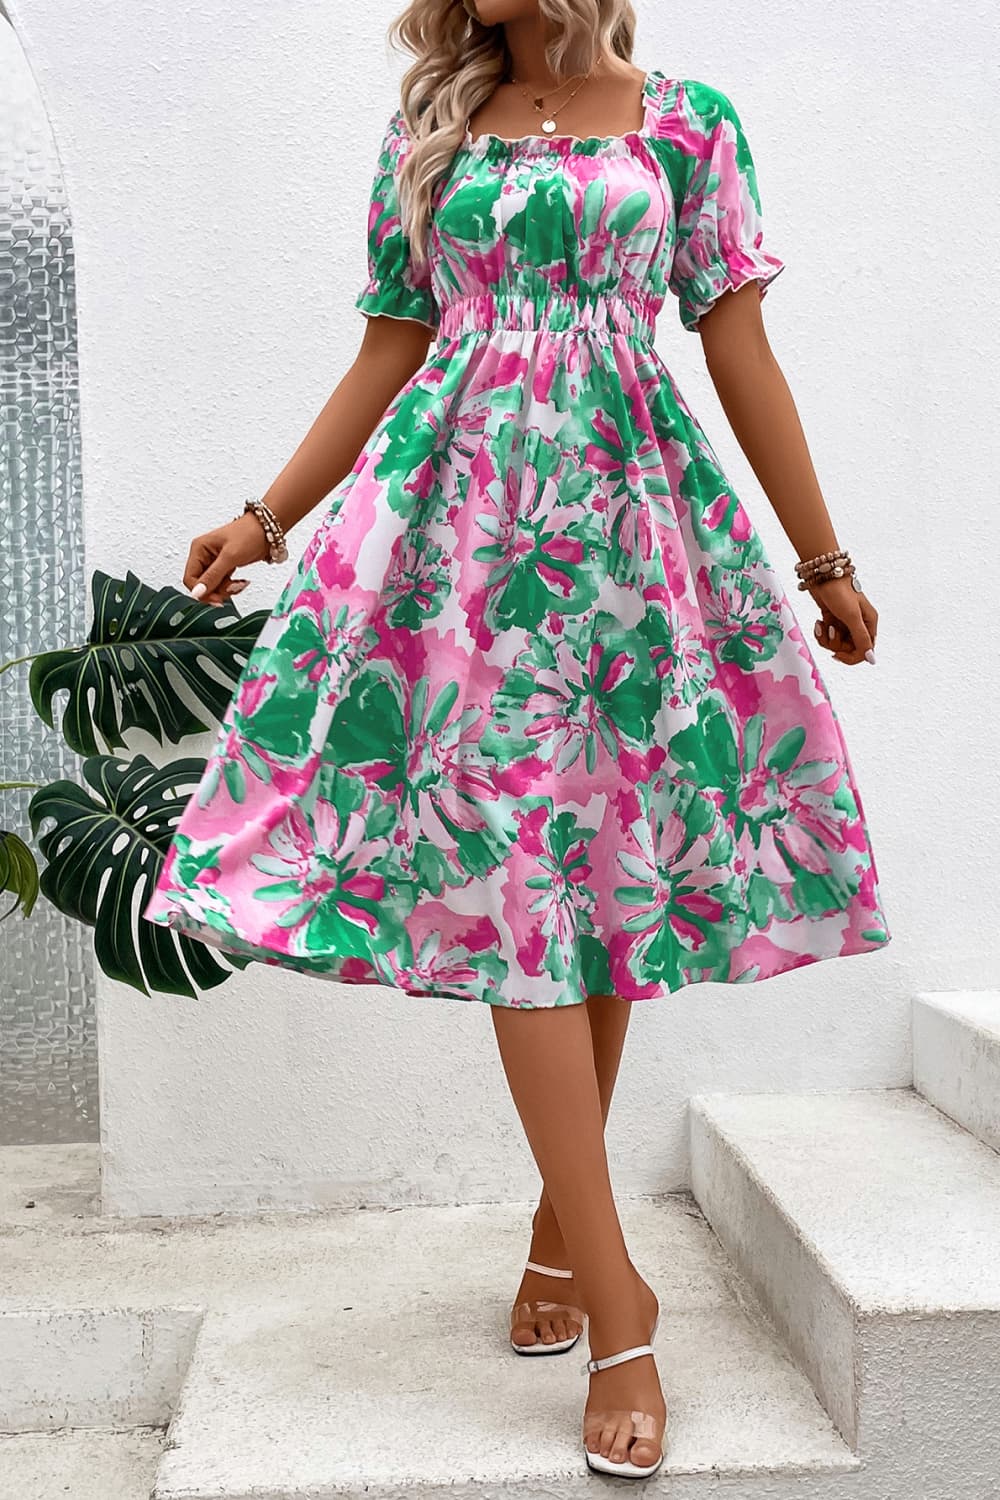 In Full Bloom Floral Frill Trim Square Neck Dress